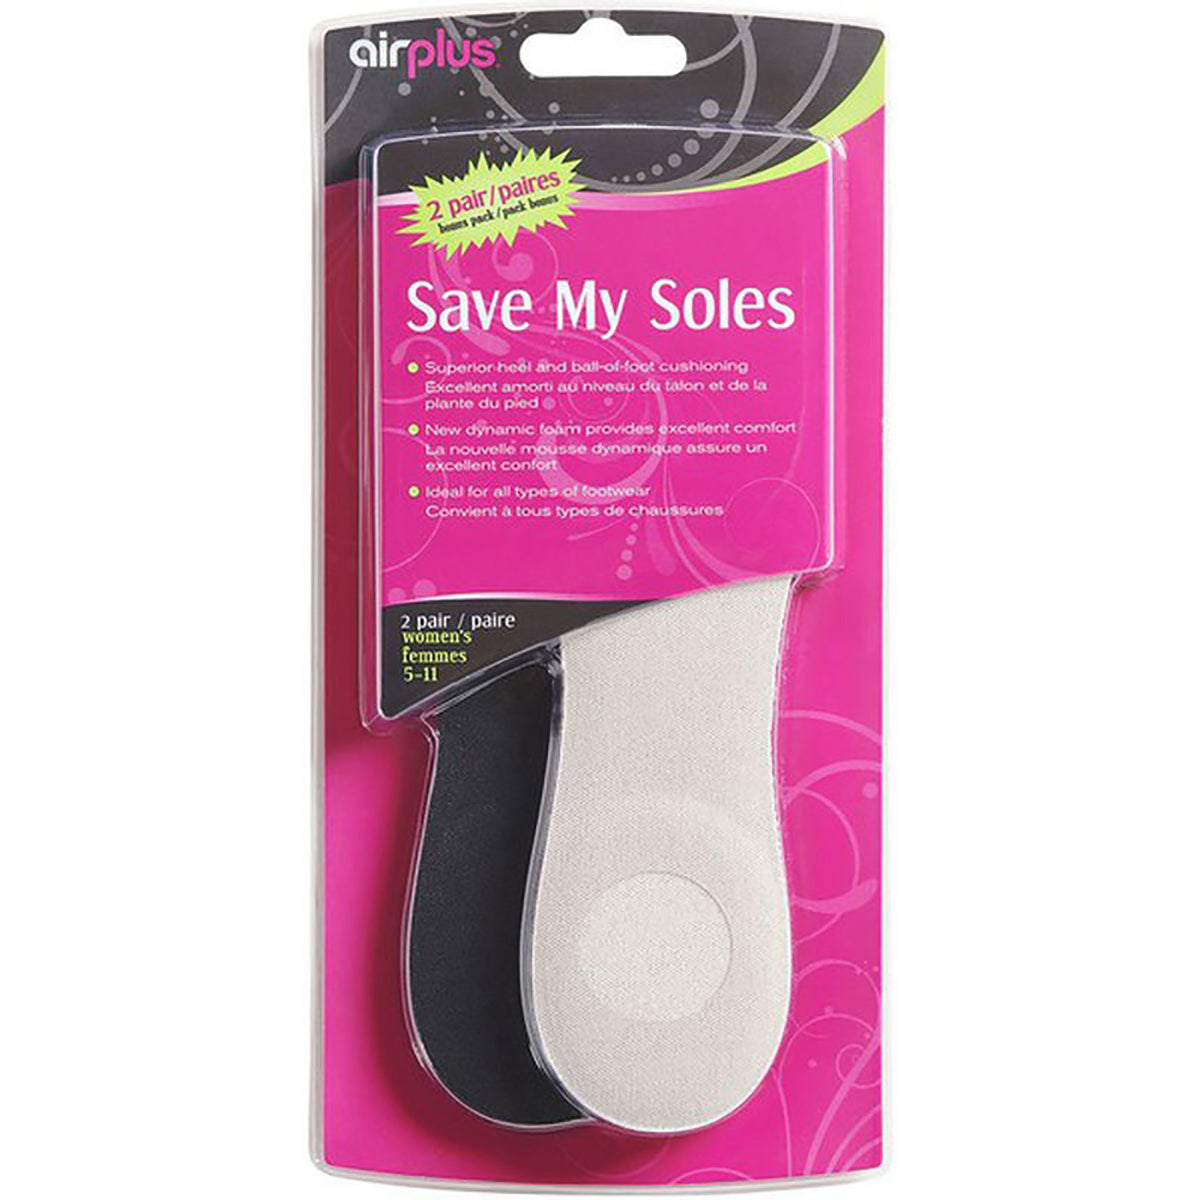 Airplus Women's Size 5-11 Save My Soles Shoe Cushions Airplus